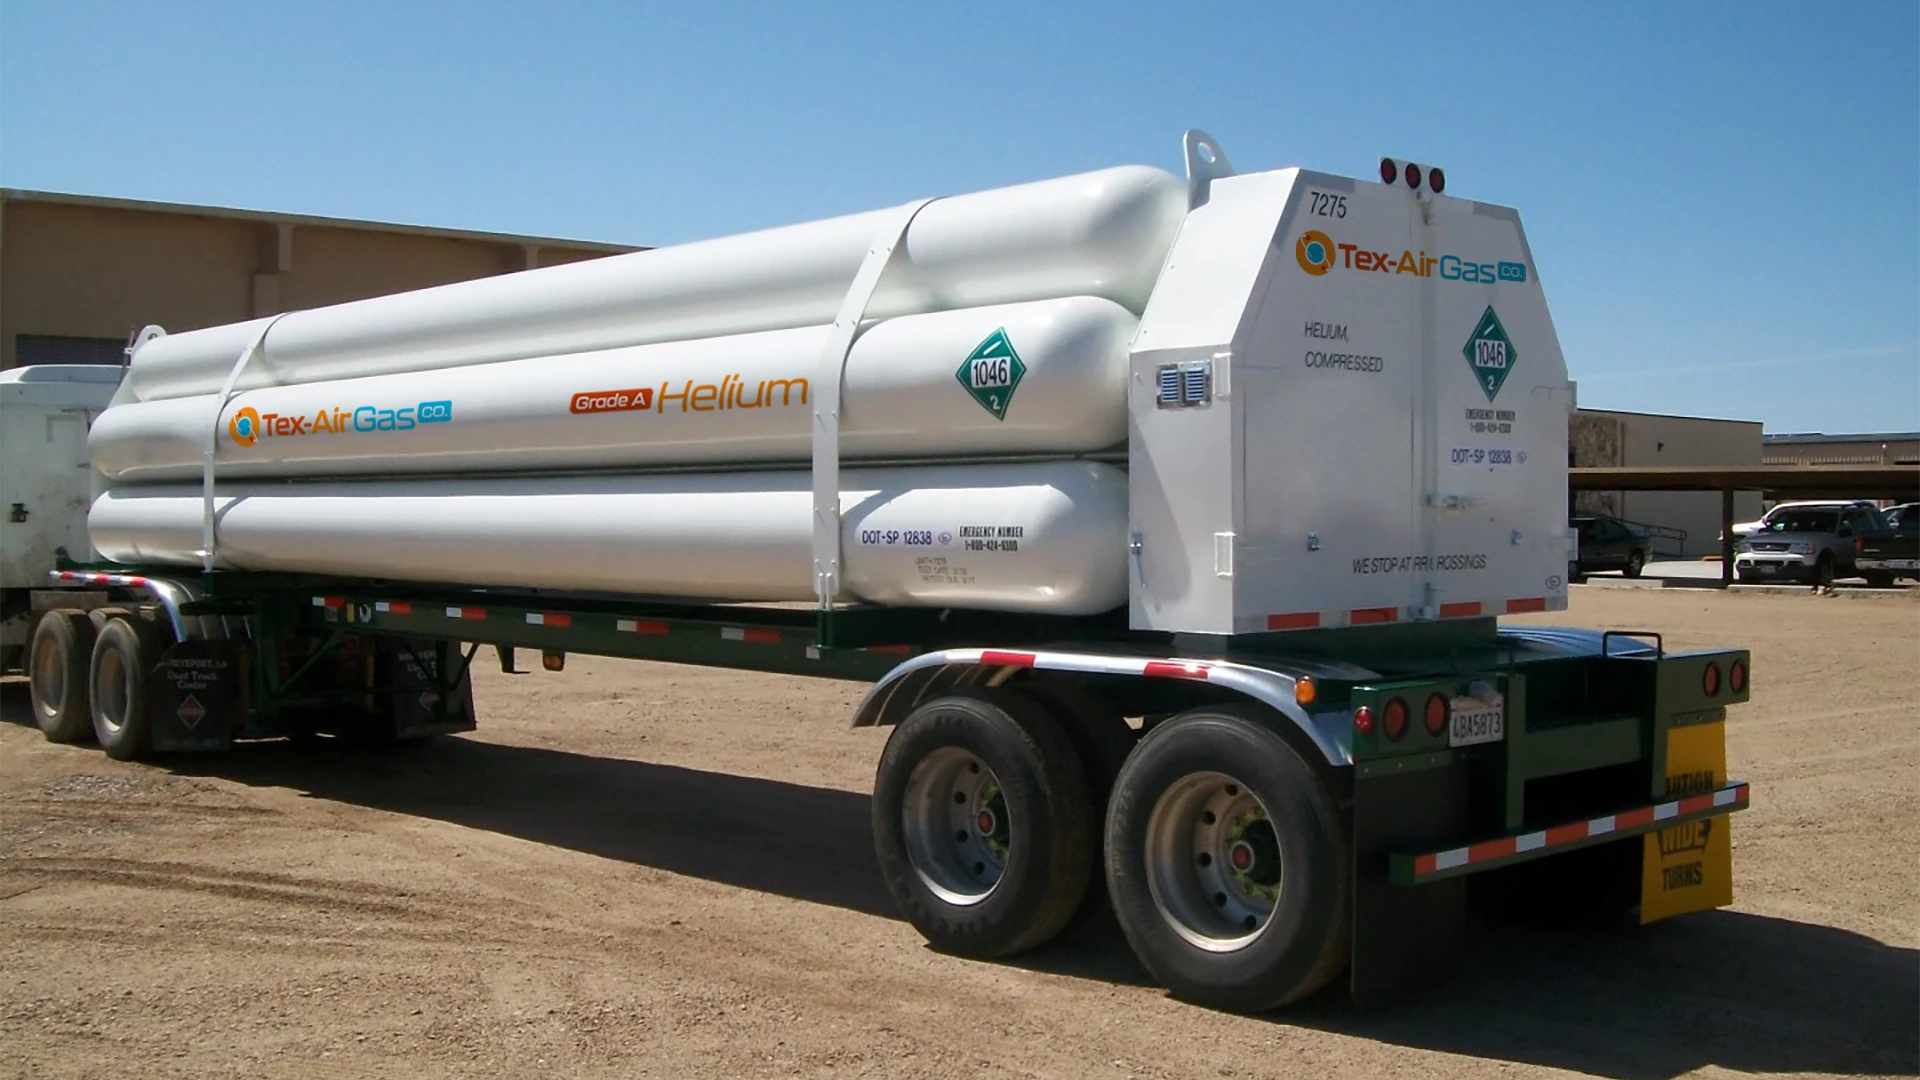 Tex Air Gas Co Container truck with Grade A Helium logo